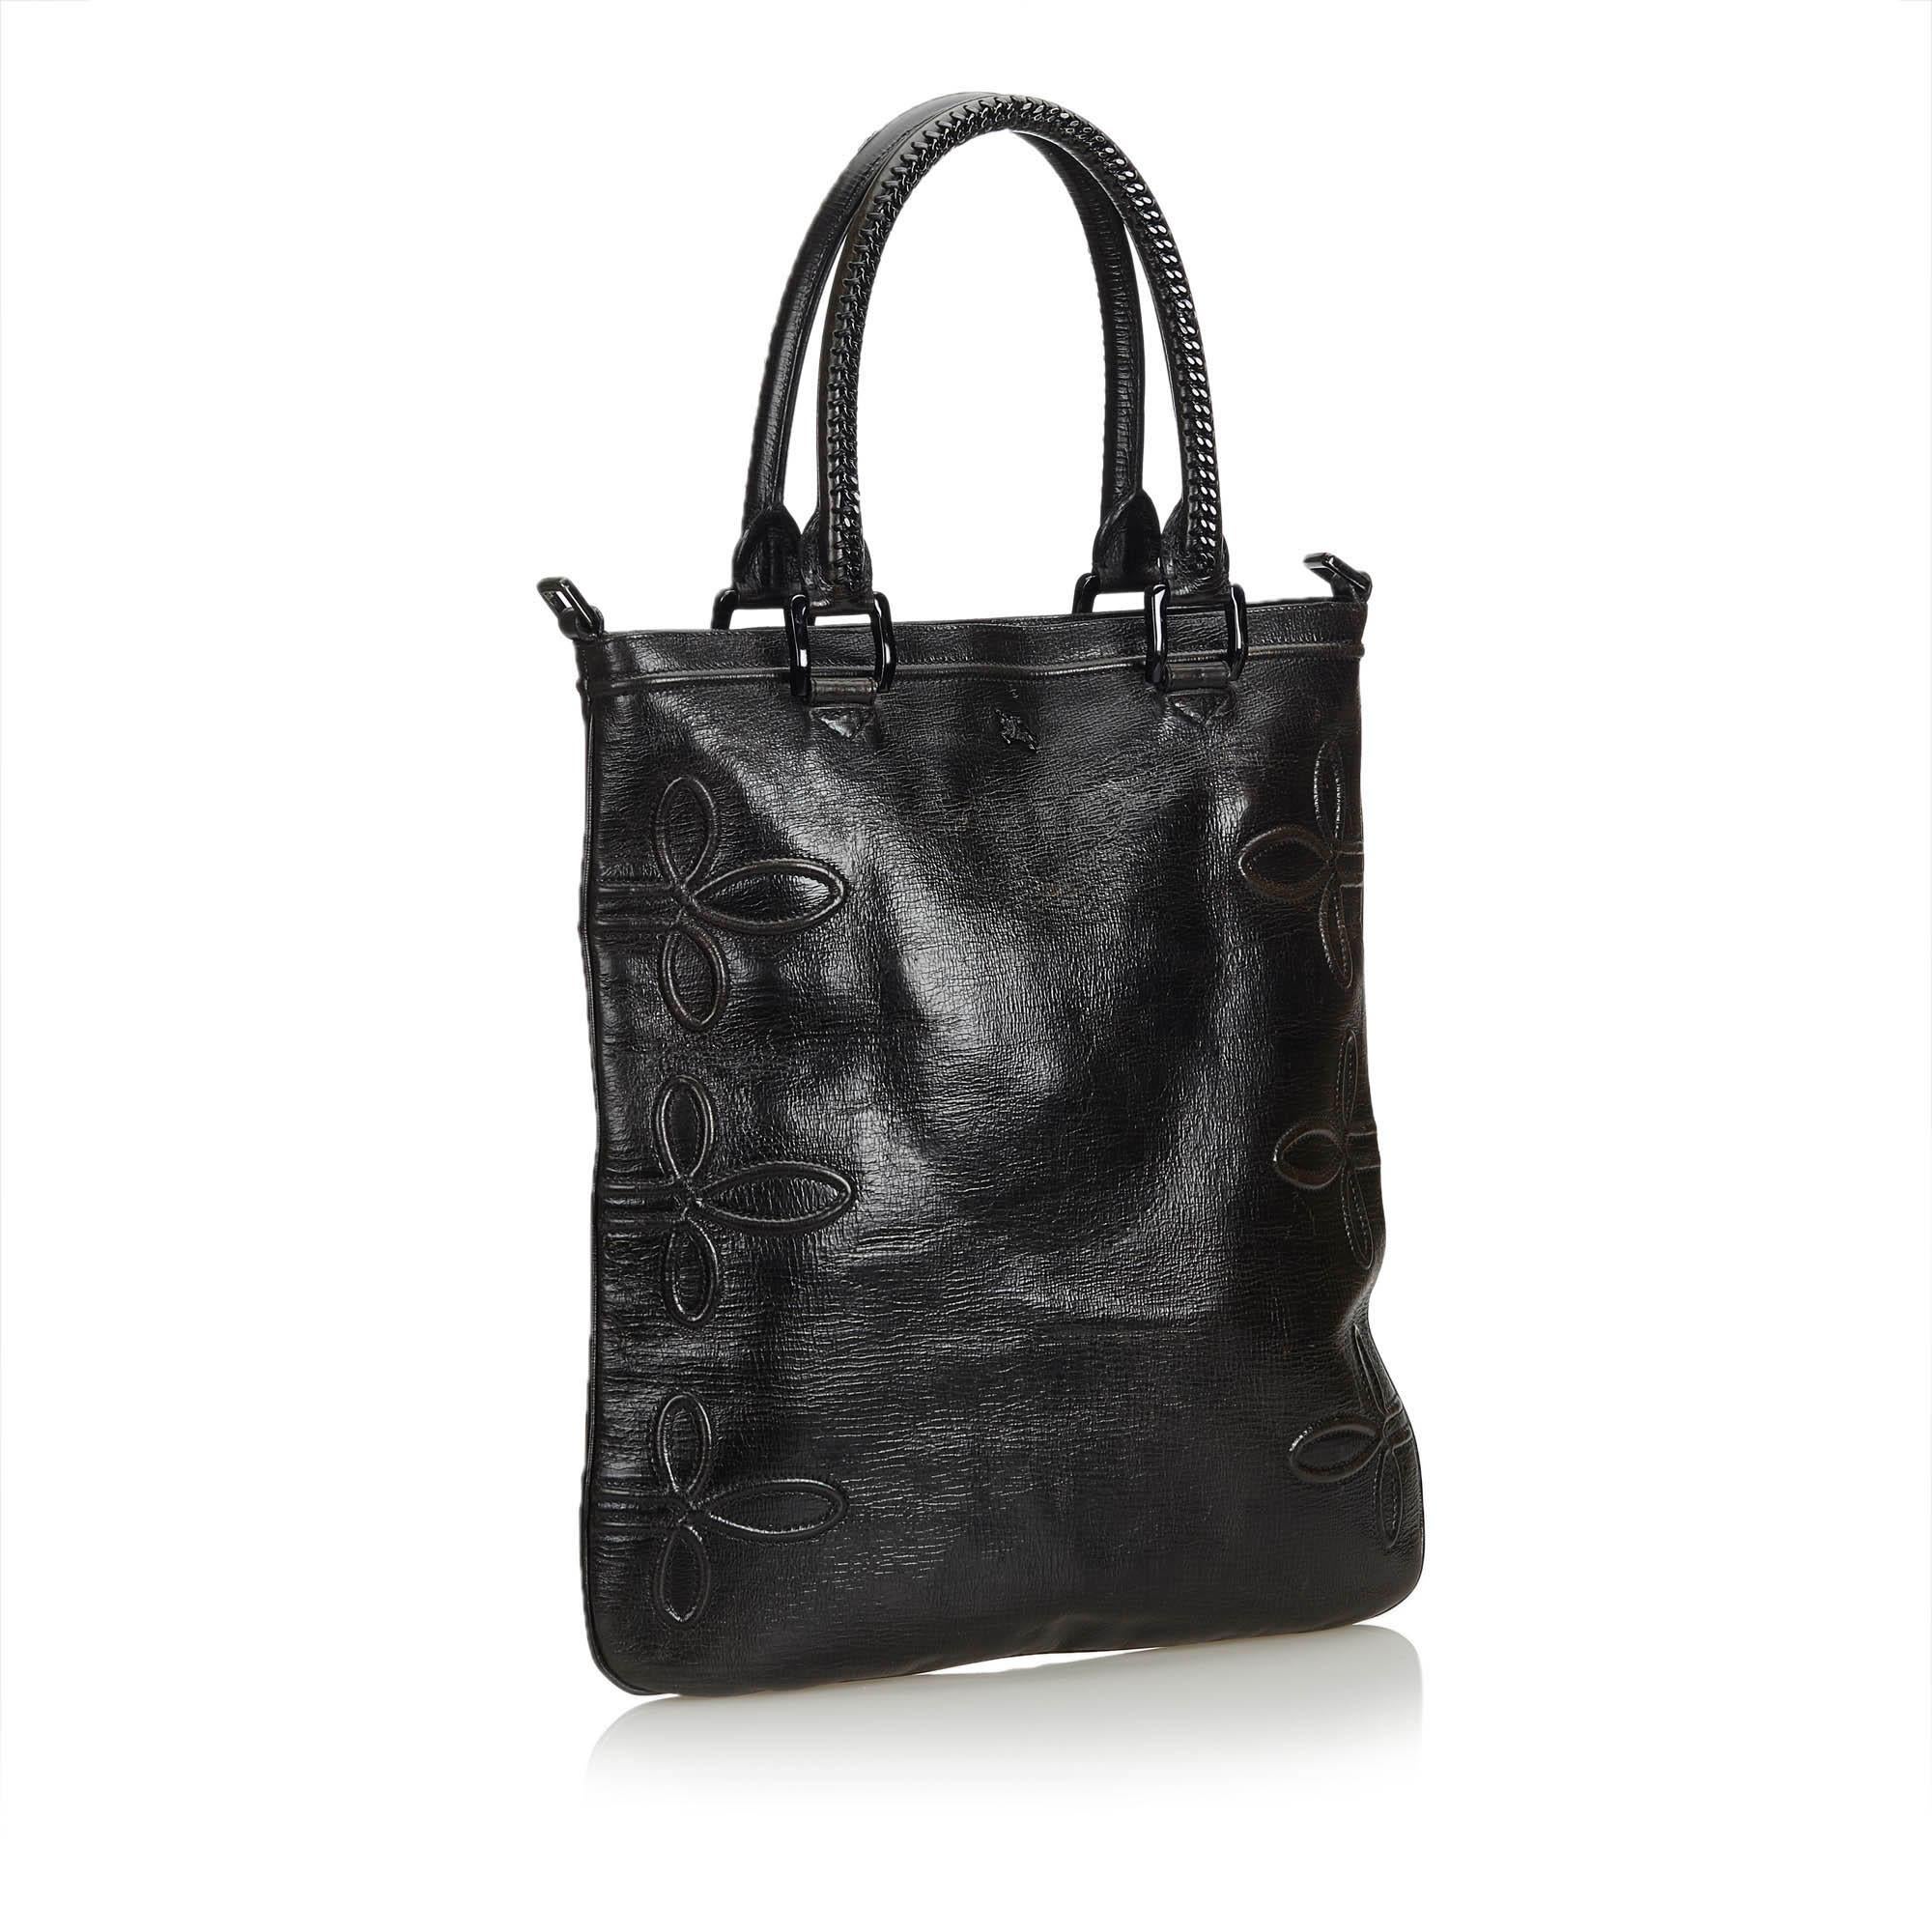 This tote bag features a leather body, rolled leather handles, a top zip closure, and interior zip and slip pockets. It carries as B+ condition rating.

Inclusions: 
This item does not come with inclusions.

Dimensions:
Length: 45.00 cm
Width: 37.00